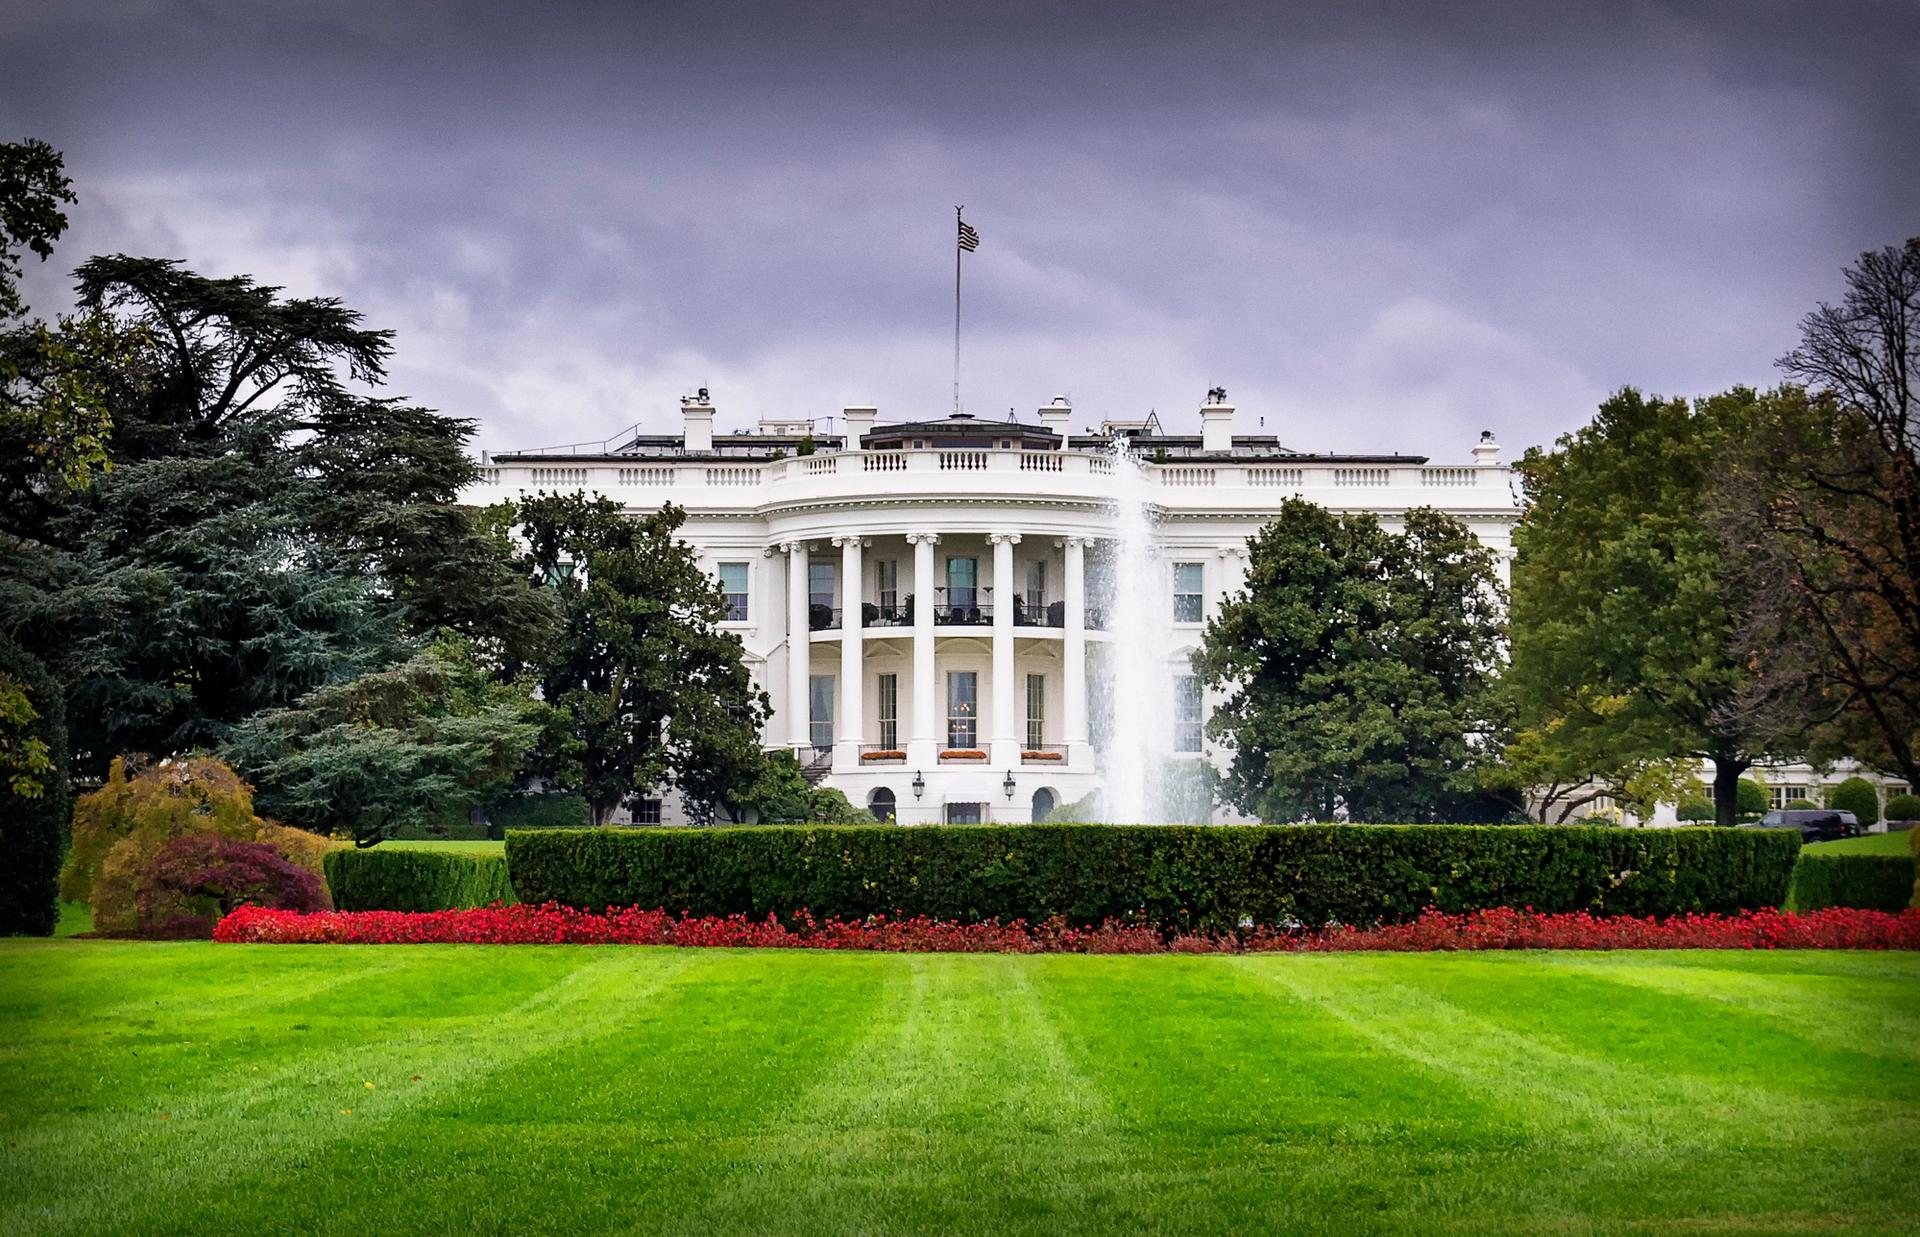 The White House Photo by Diego Cambiaso/Flickr